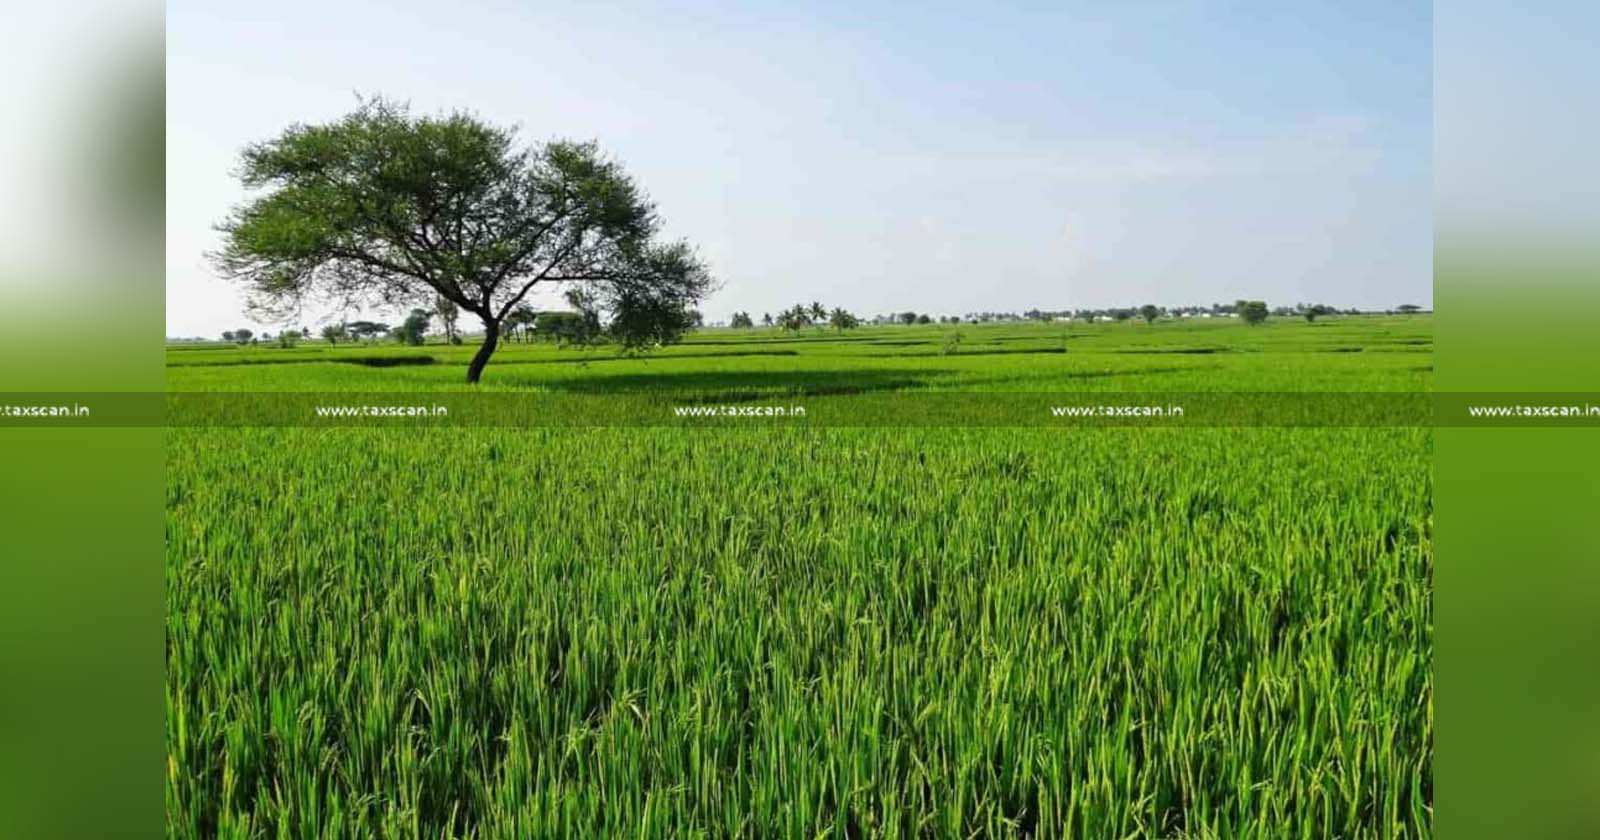 Income Arising from Sold Land Established - Agricultural Land Treated as Capital Asset - ITAT - TAXSCAN